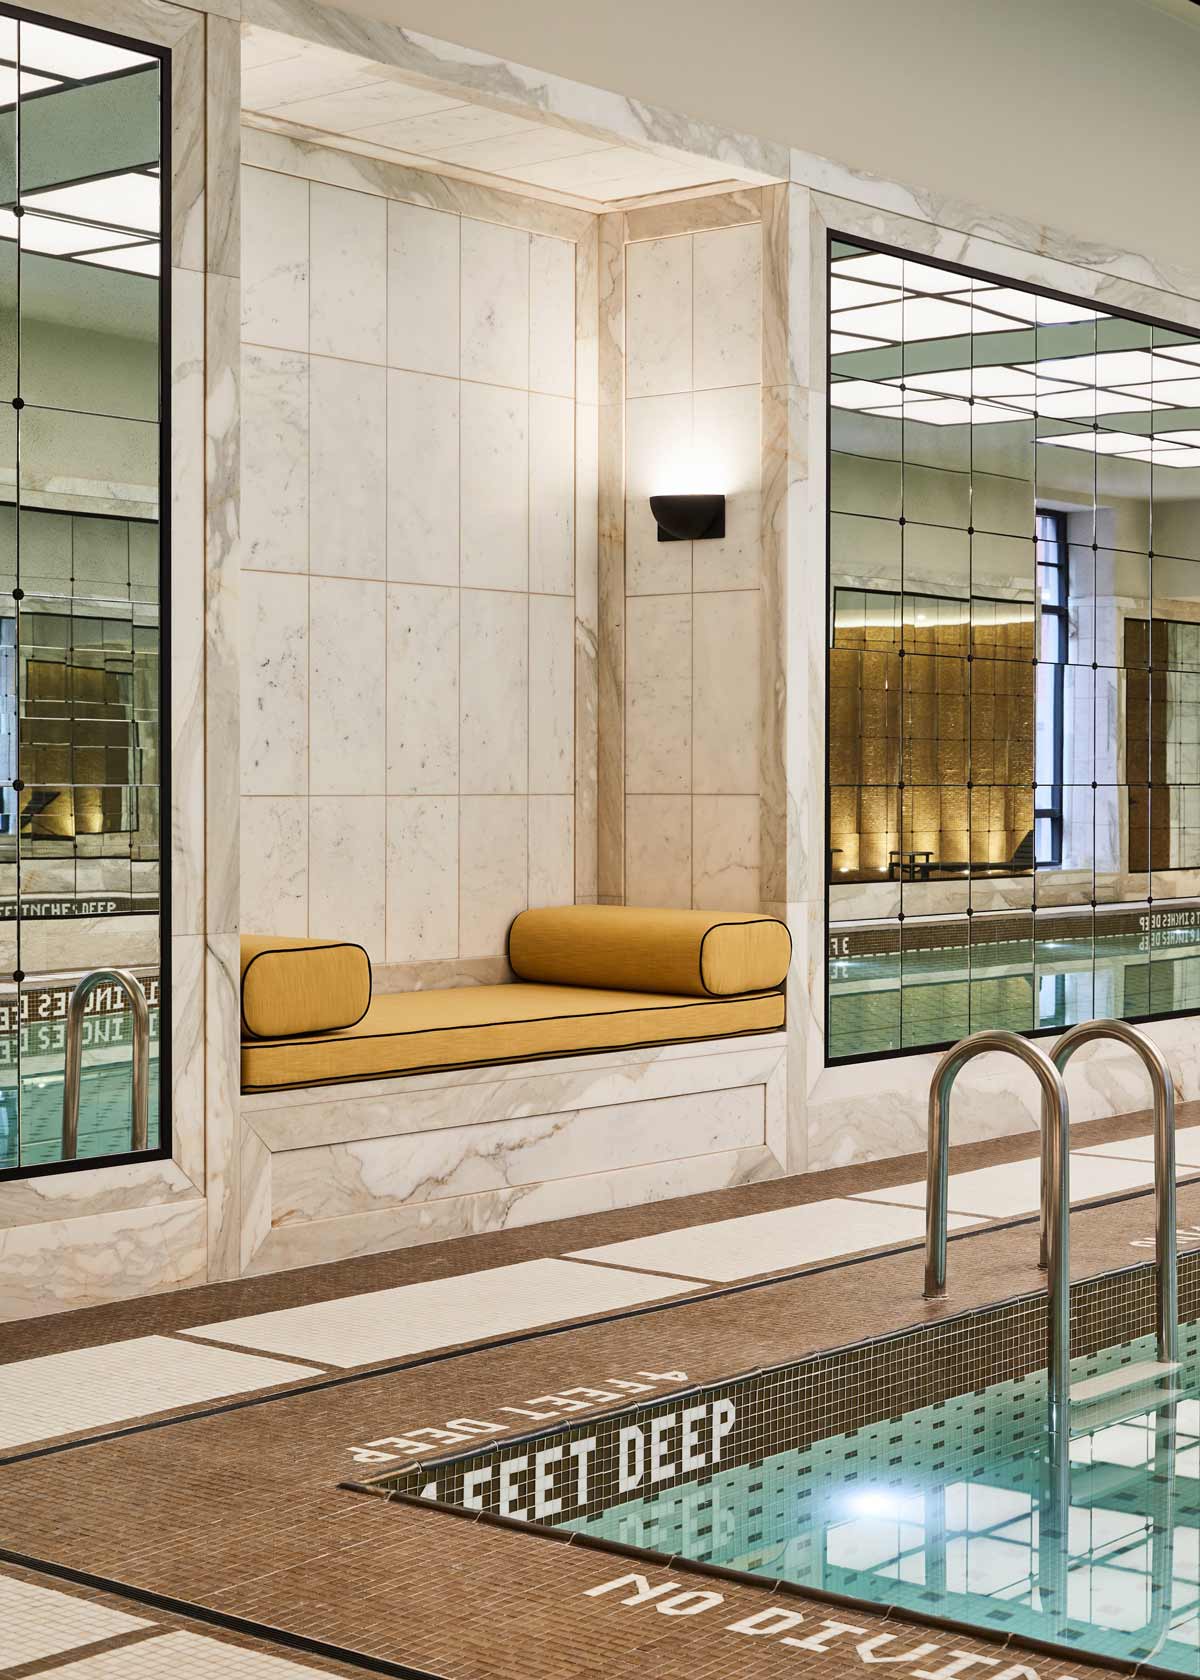 Interior detail in the 25 Park Row pool.